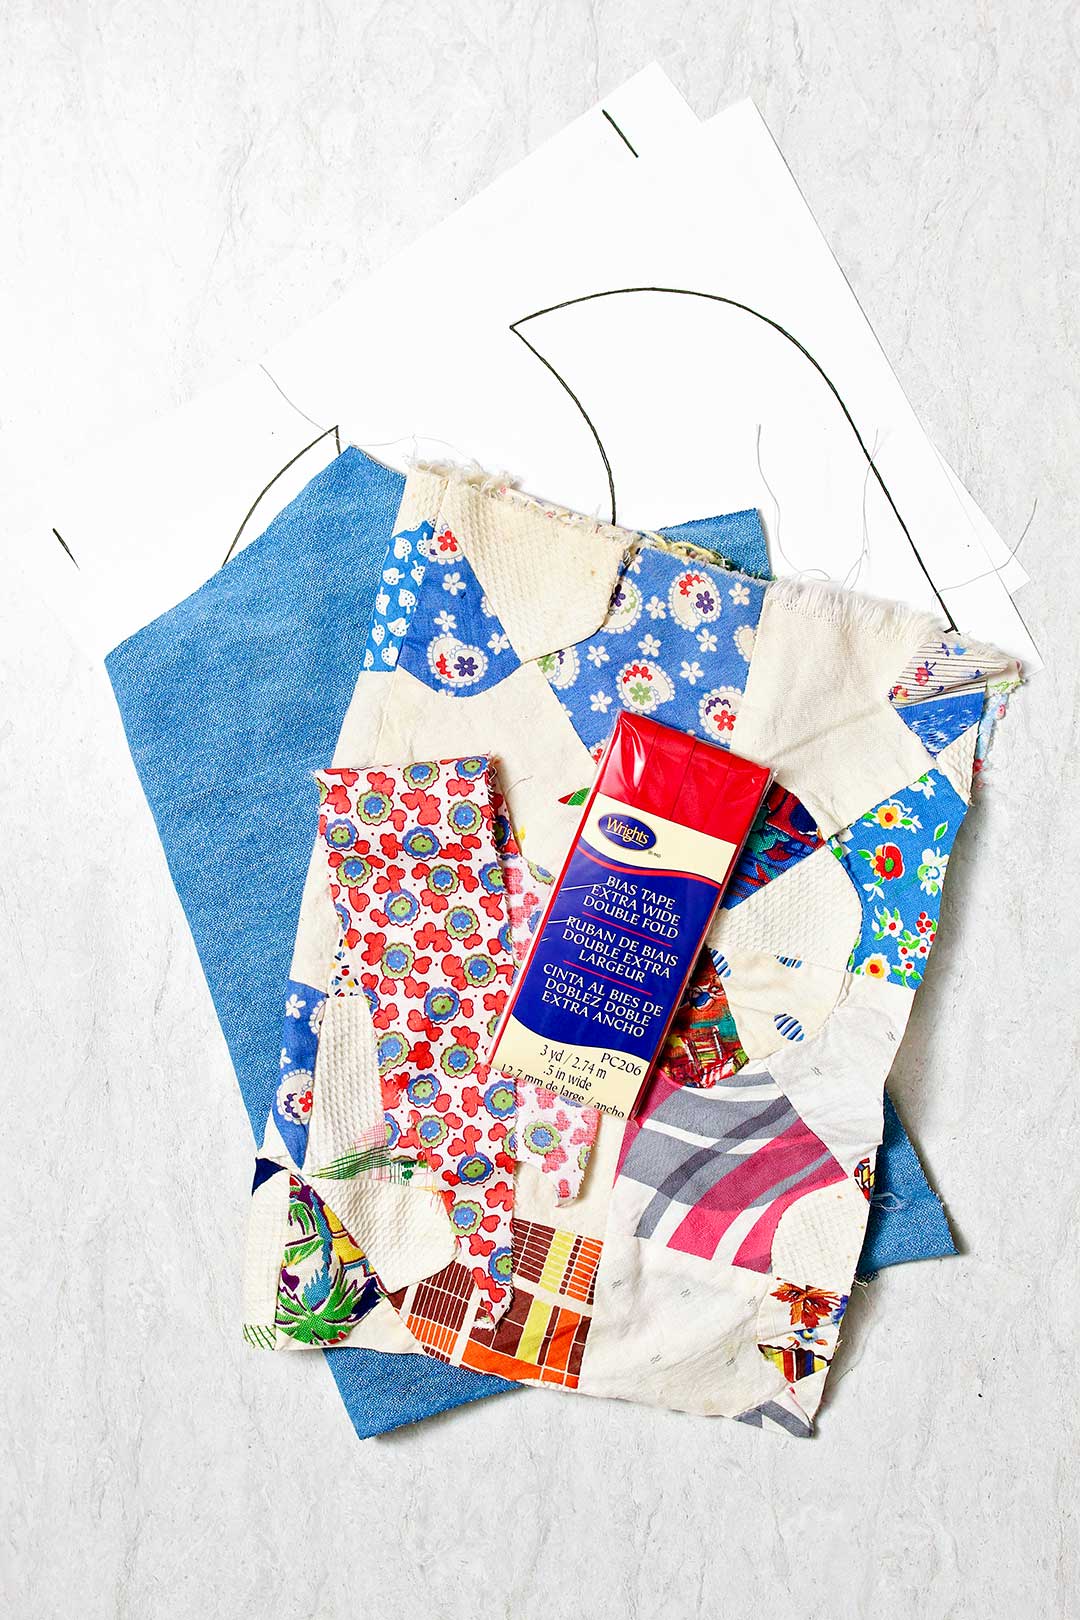 Supplies to make reversible baby bibs. Blue fabric, patchwork fabric, bias tape and patterns.